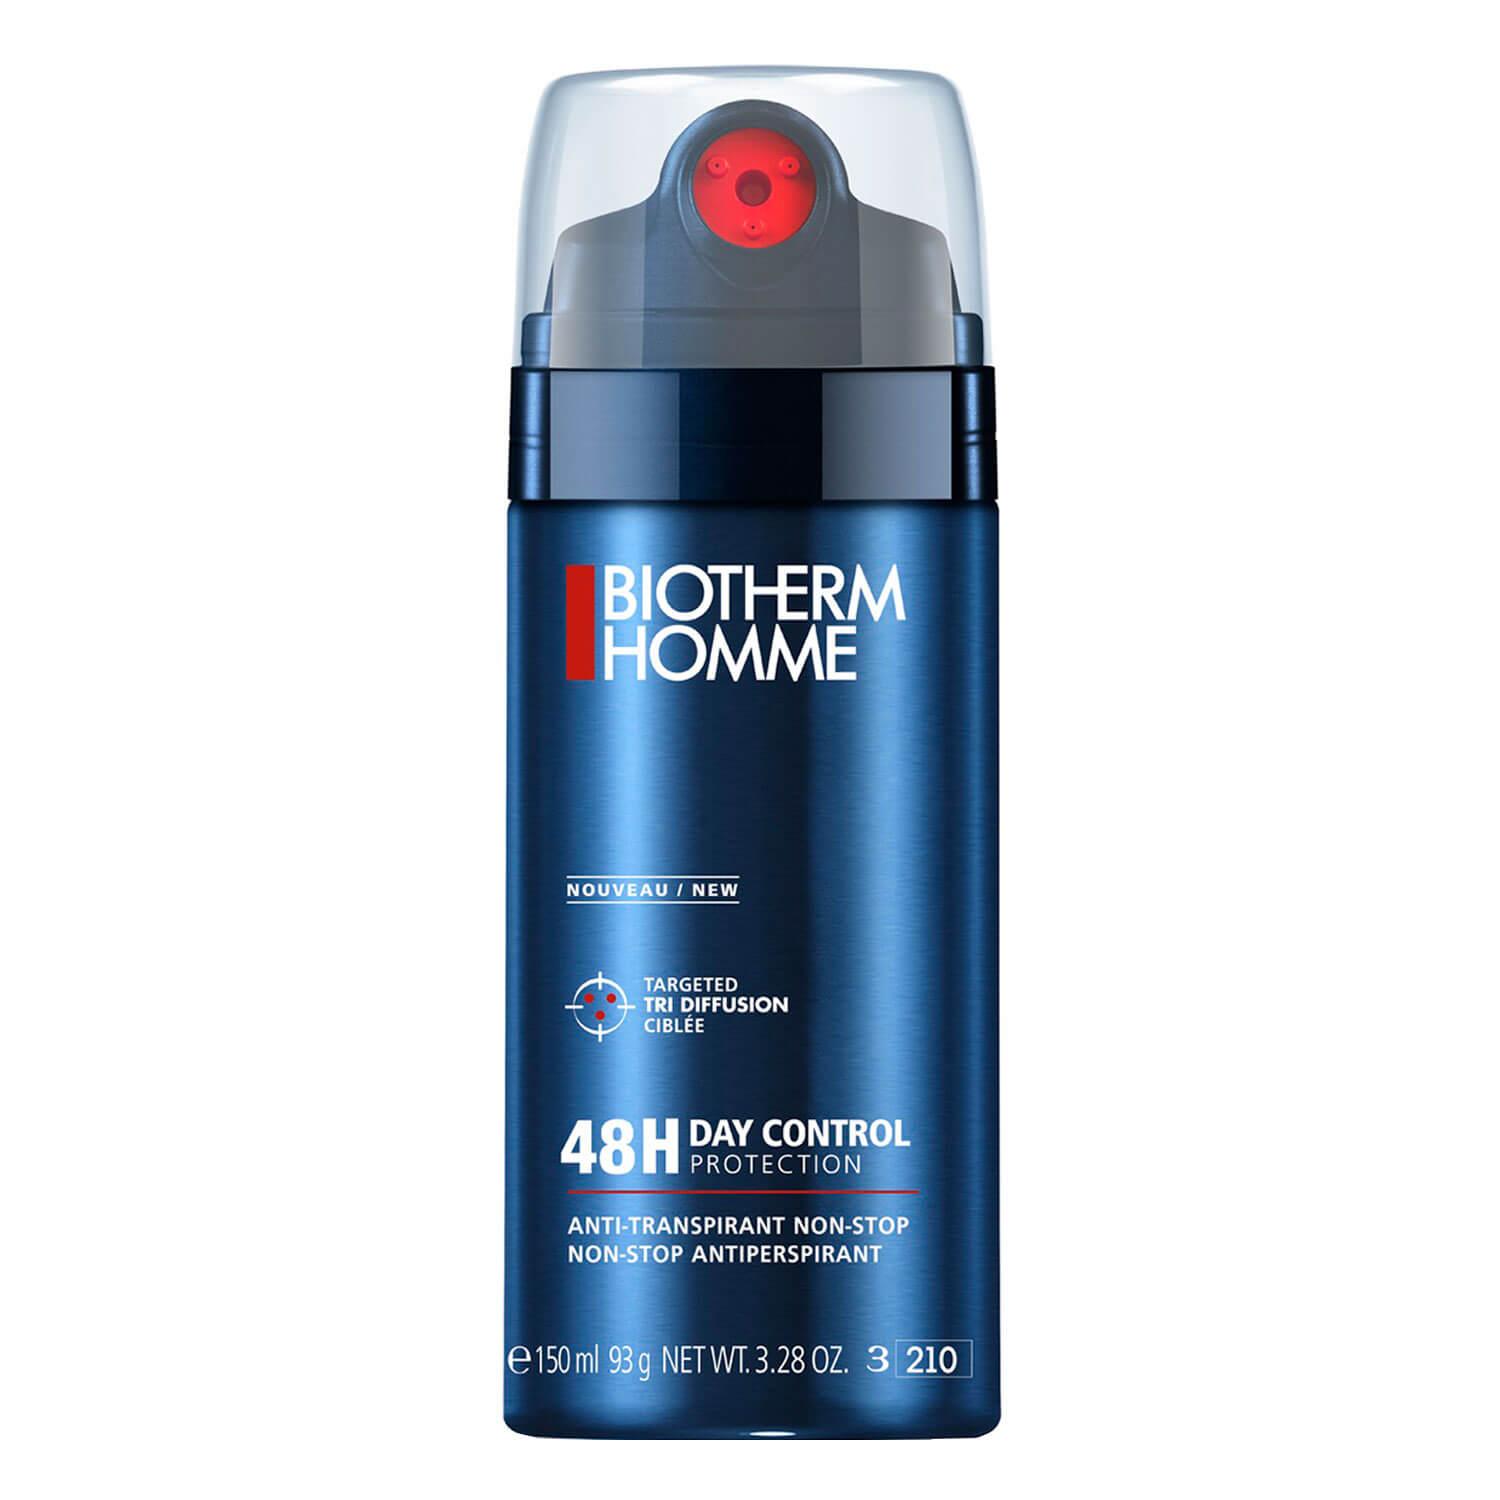 Biotherm Homme - Day Control 48H Extreme Protection Spray